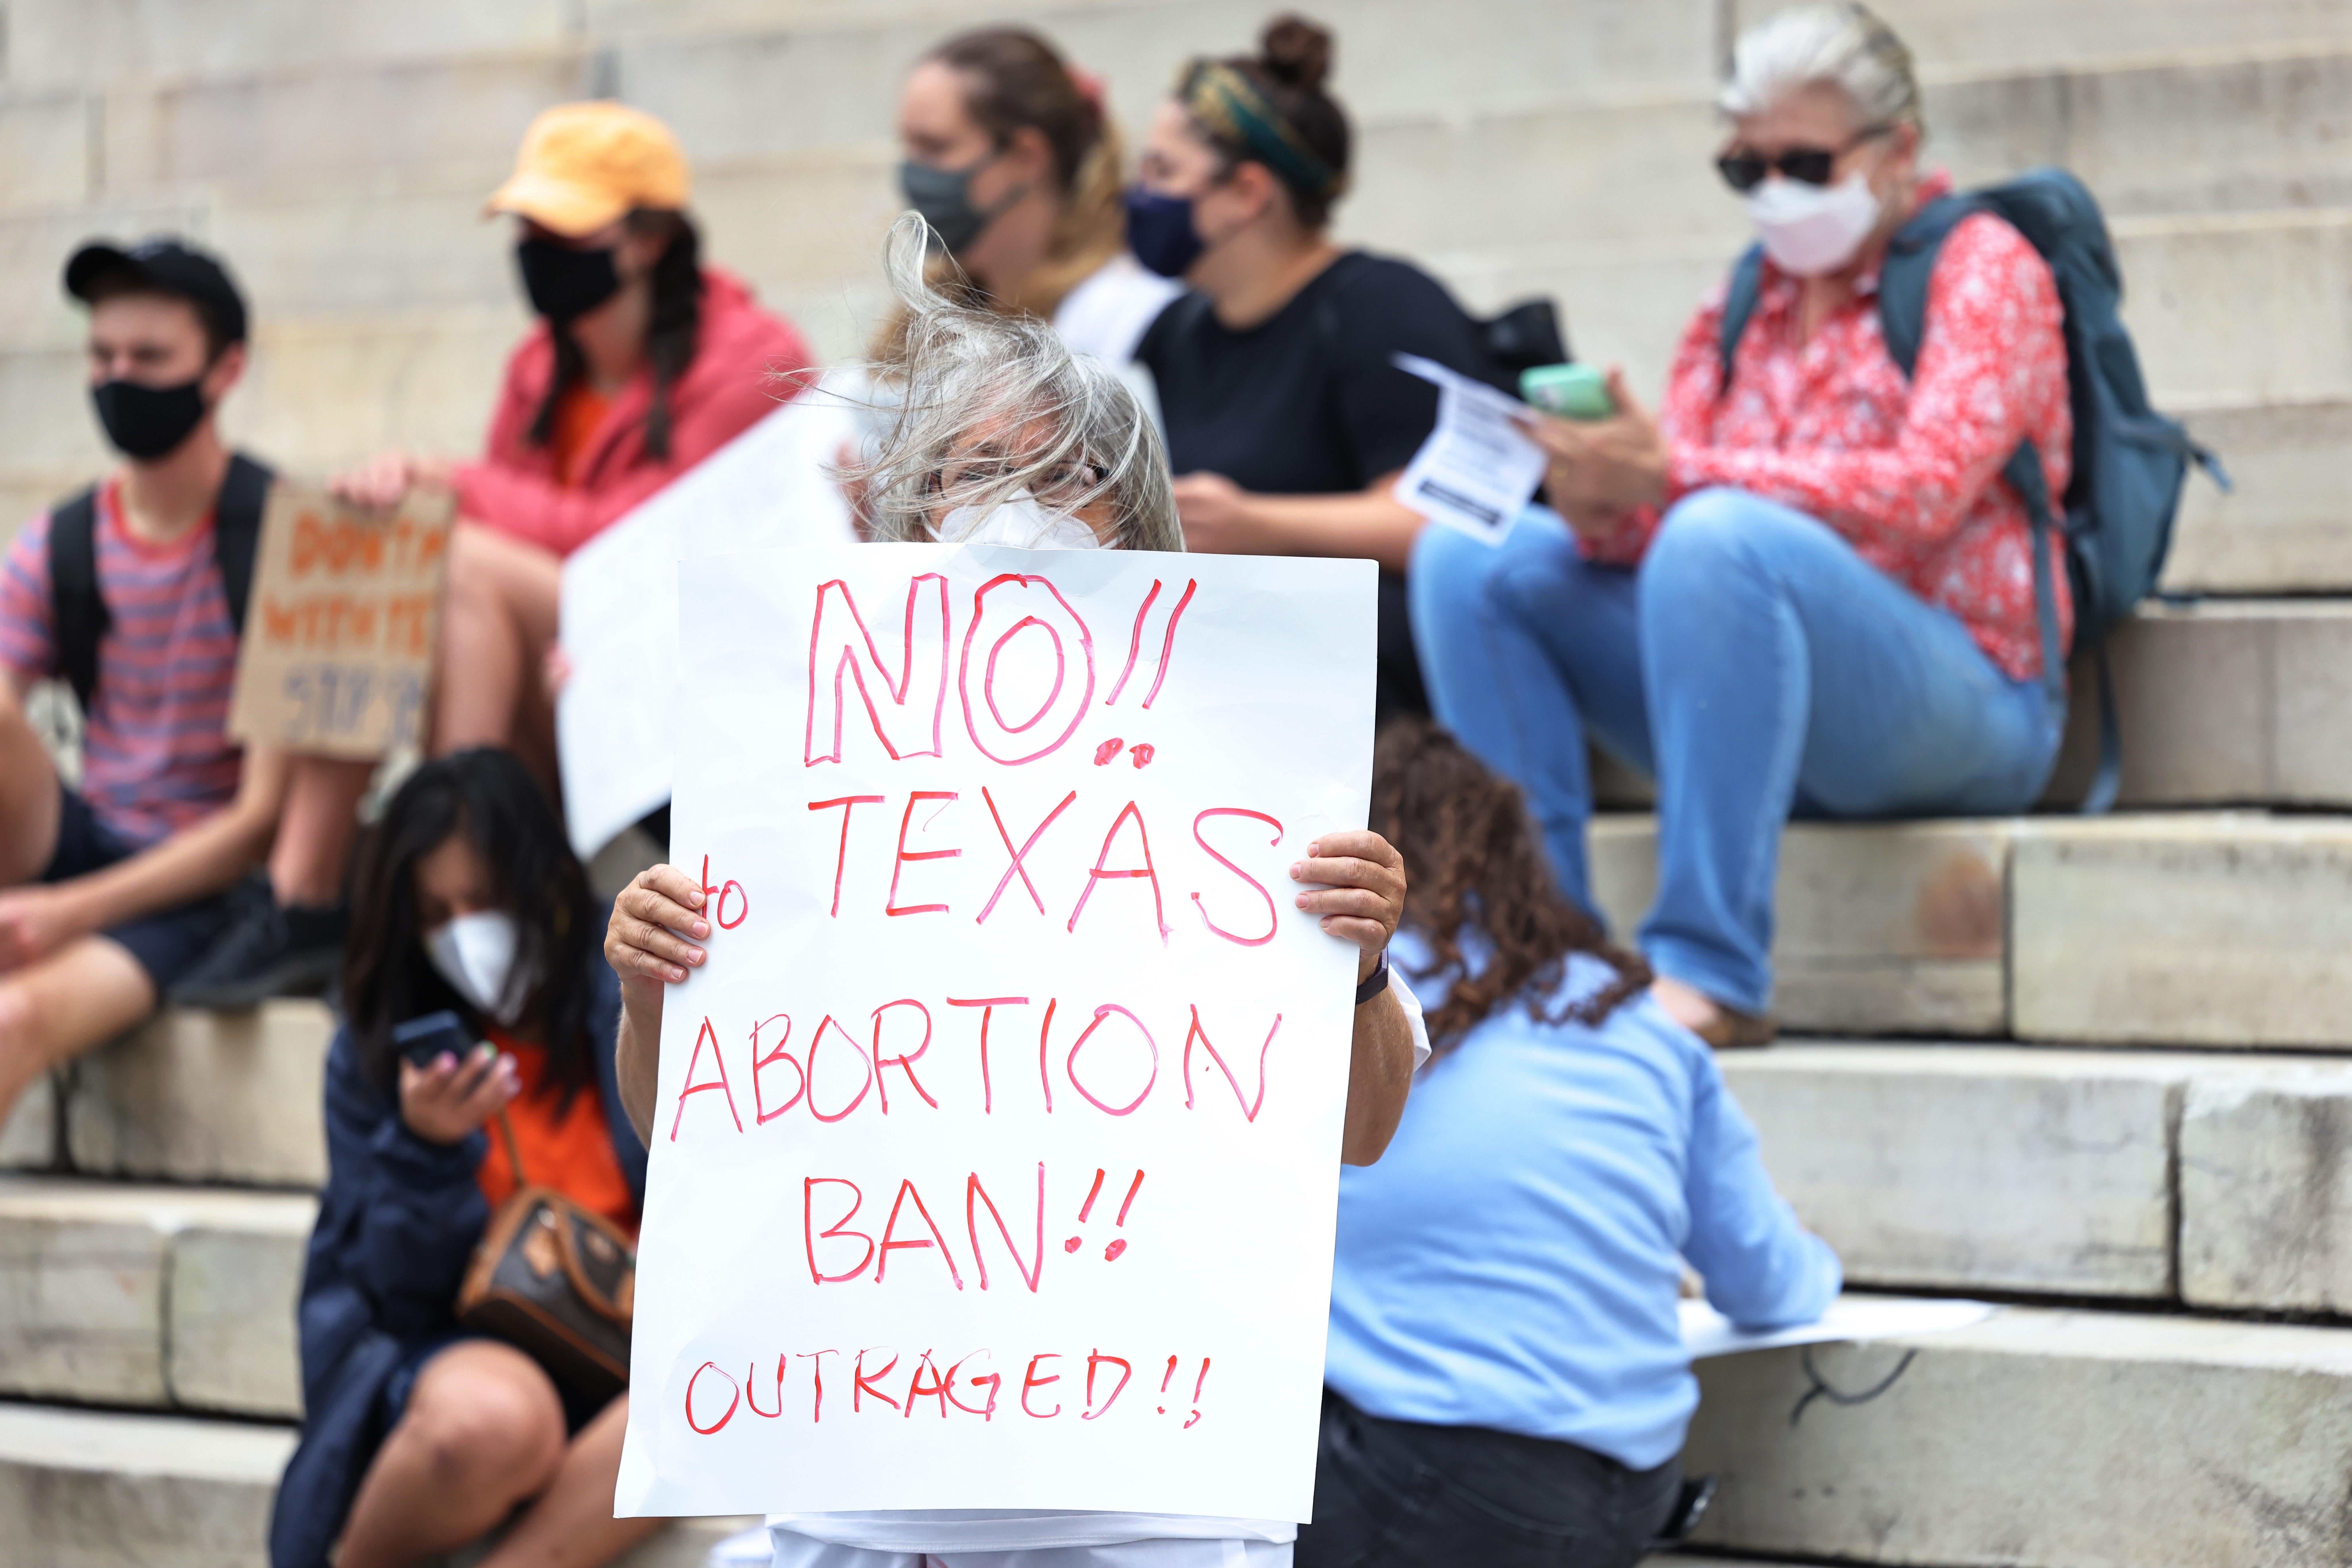 People in masks sitting on steps, with one woman holding a sign reading, "No!! Texas Abortion Ban!! Outraged!!"